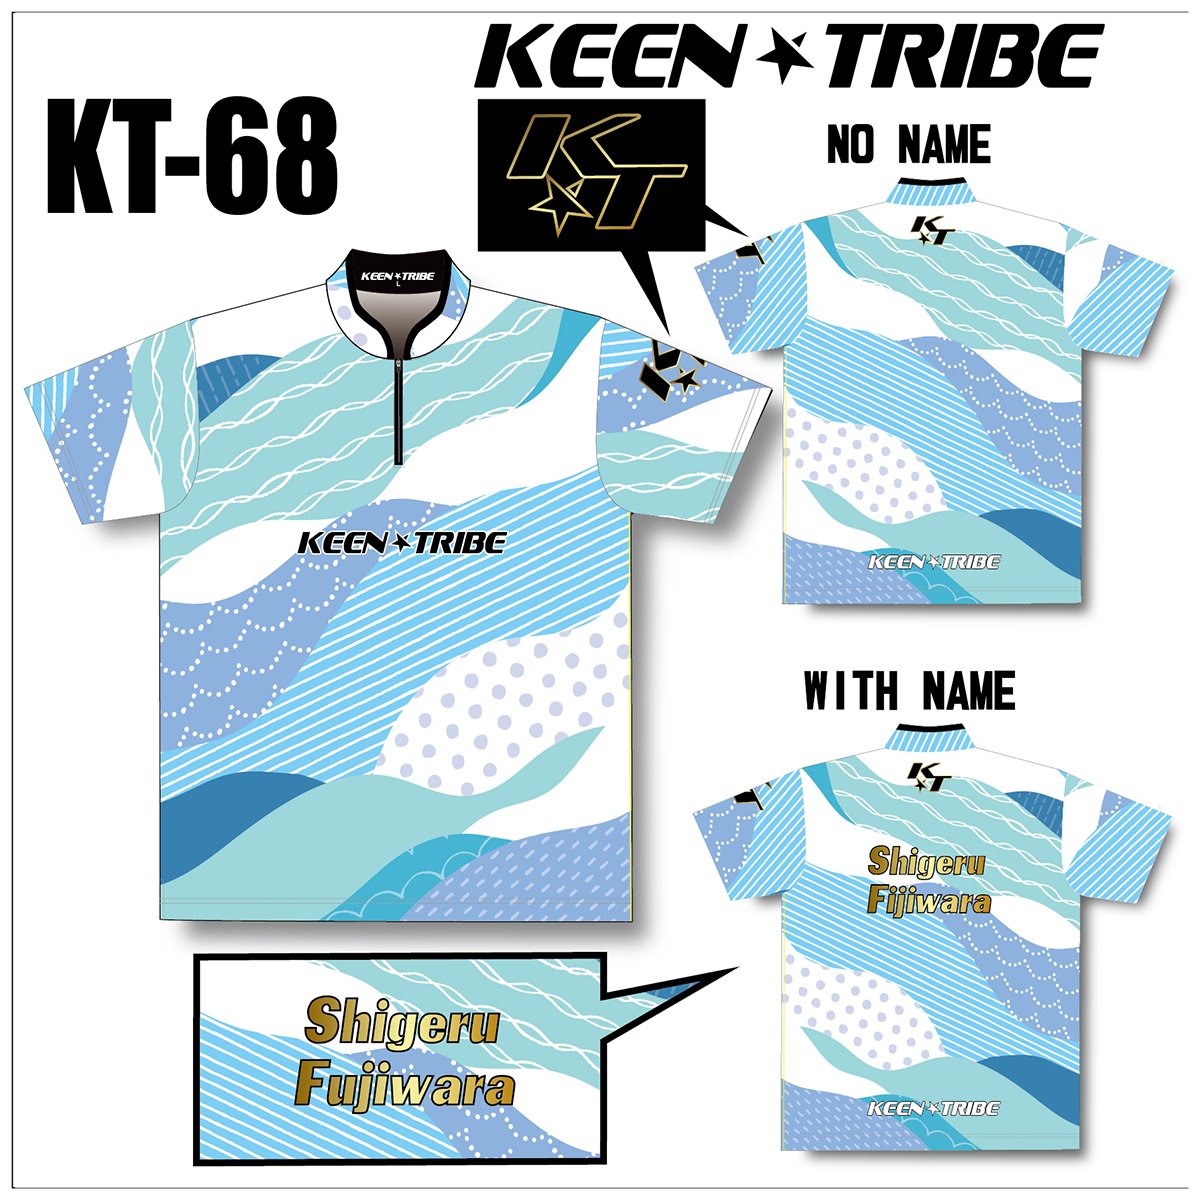 KEEN ★ TRIBE　KT-68(受注生産)